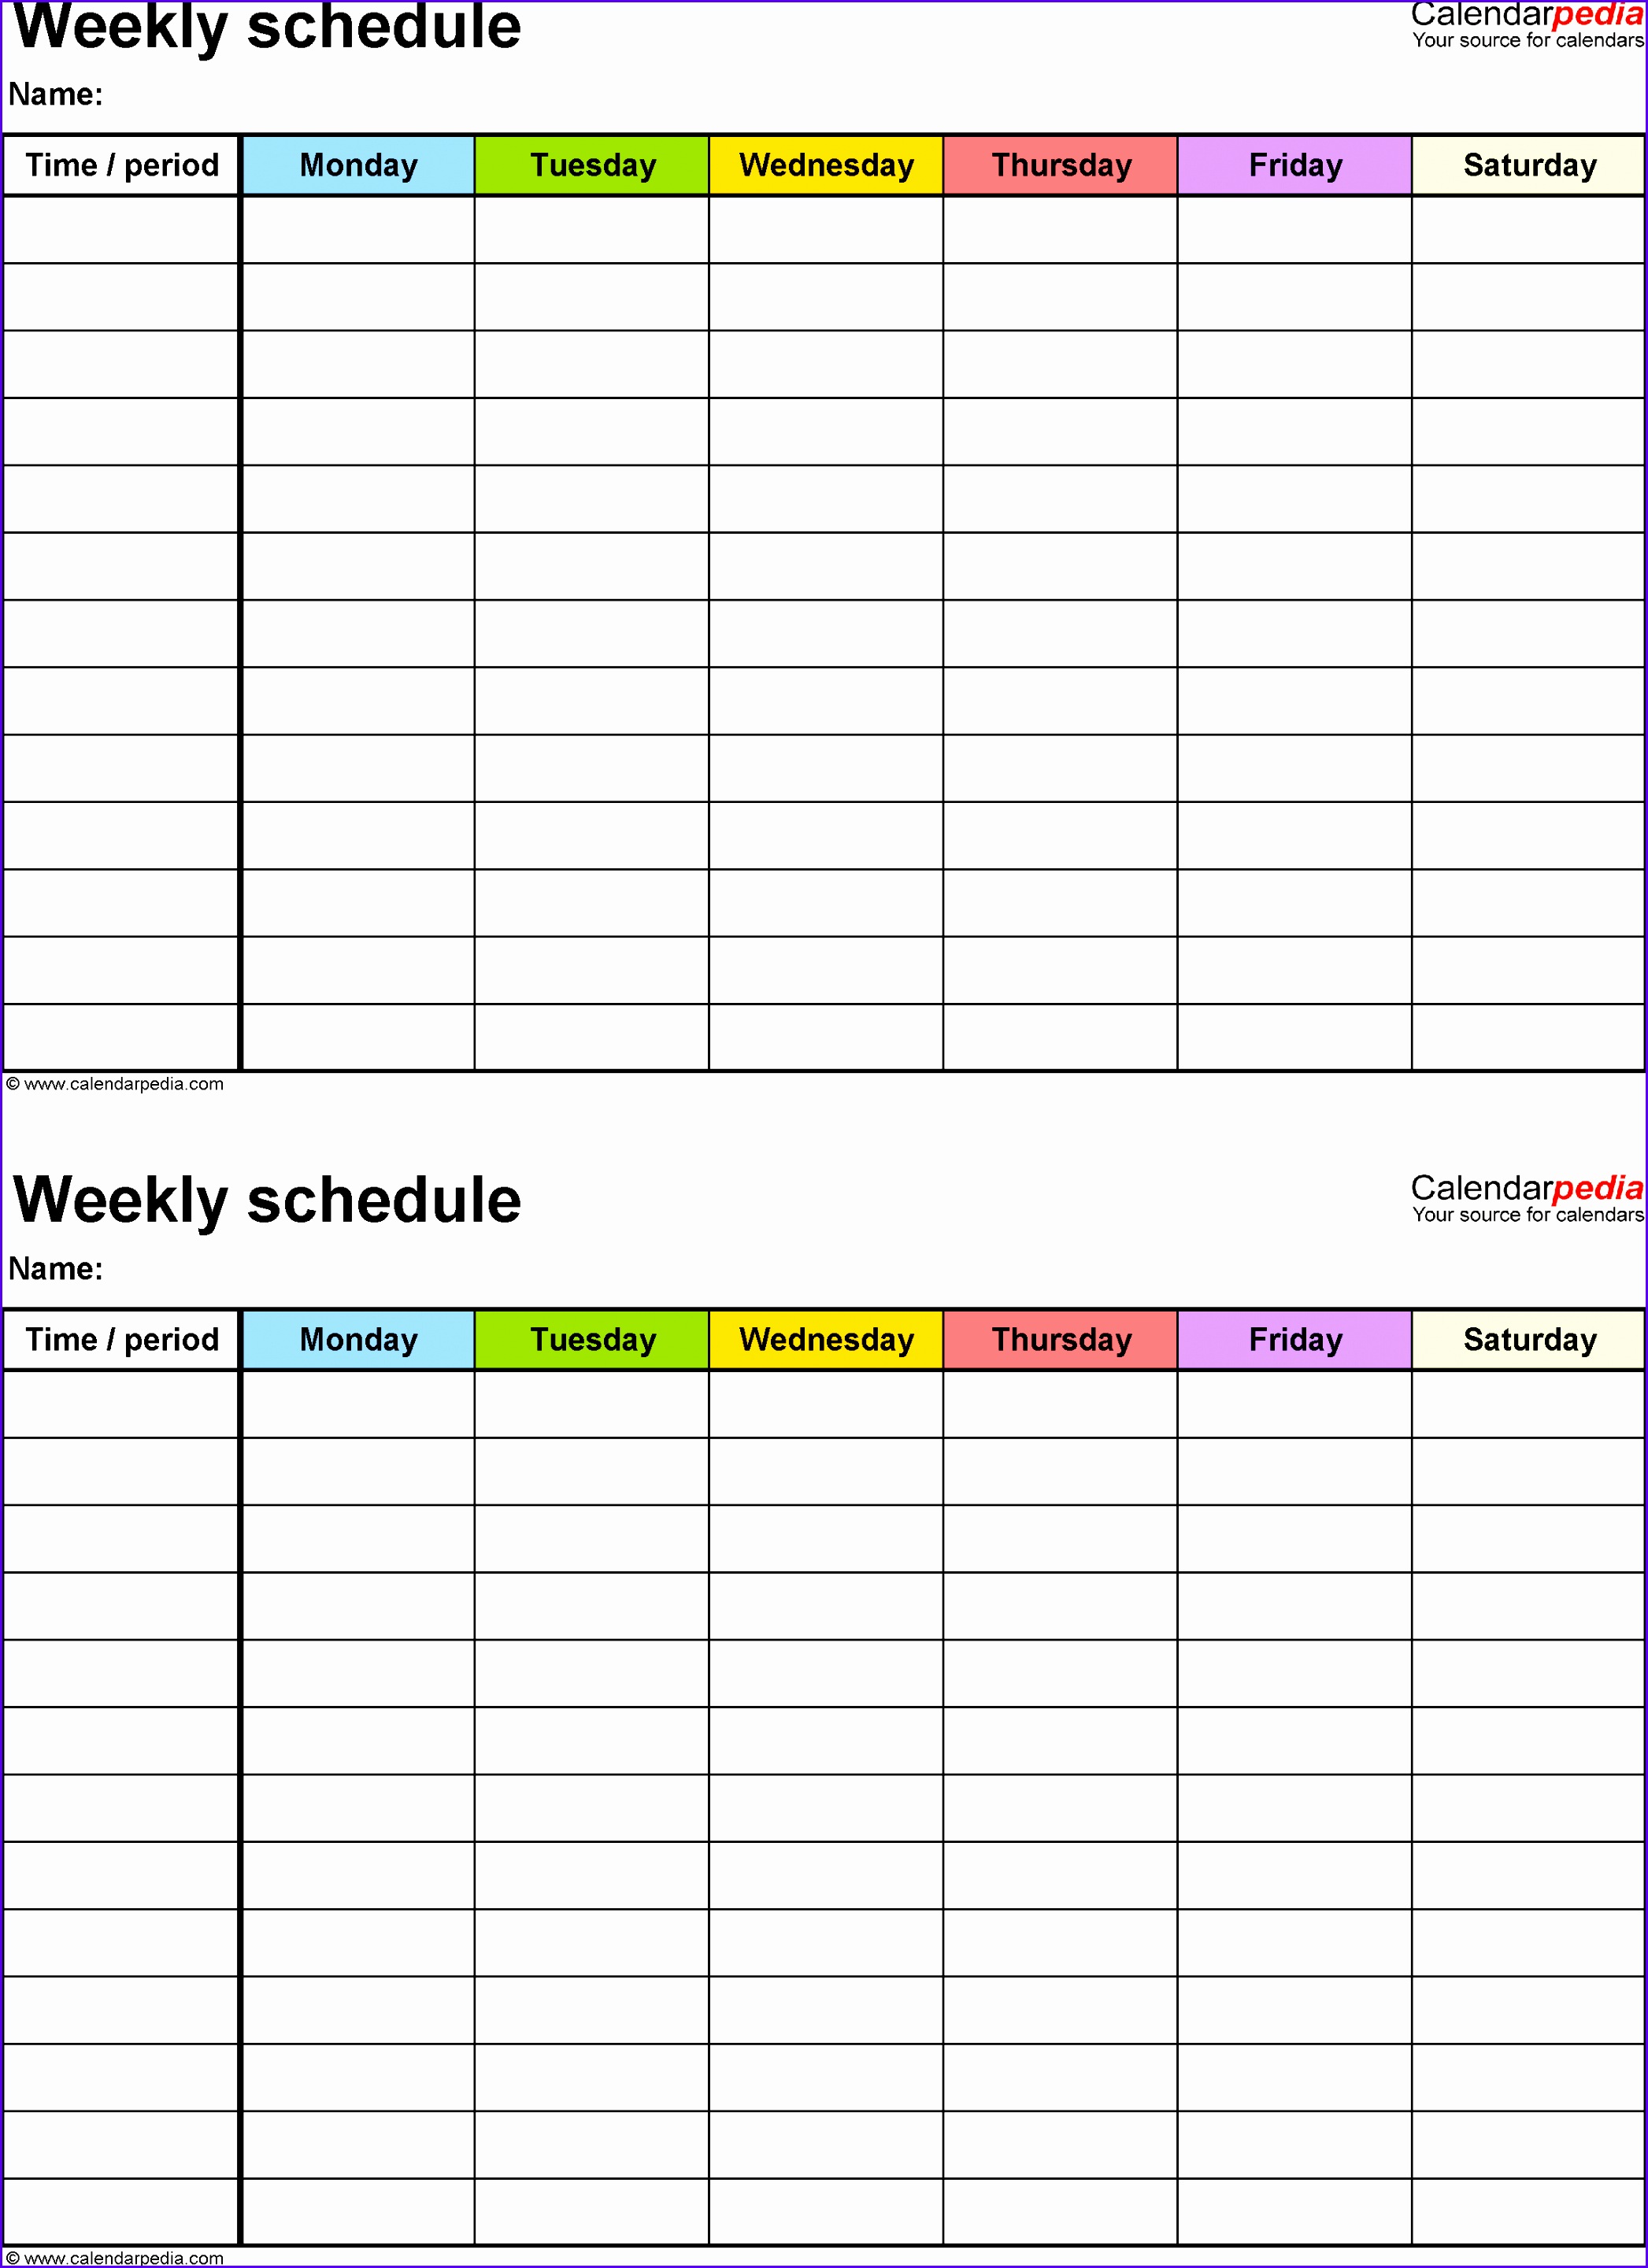 Weekly schedule template for Excel version 9 2 schedules on one page portrait